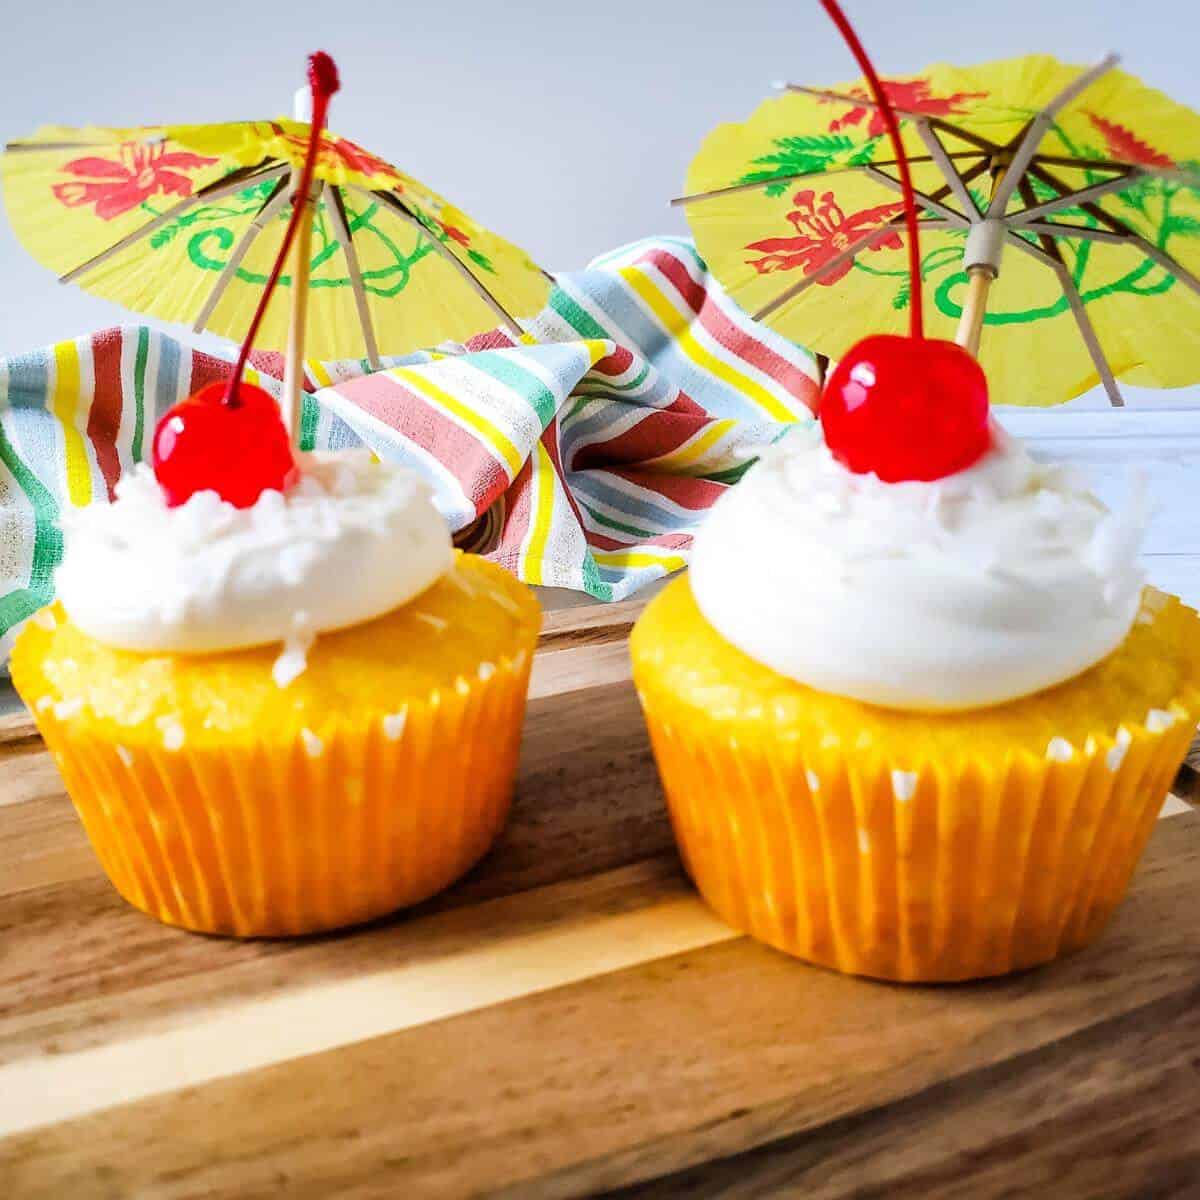 Two pina colada cupcakes with cherries on top sitting on a cutting board.